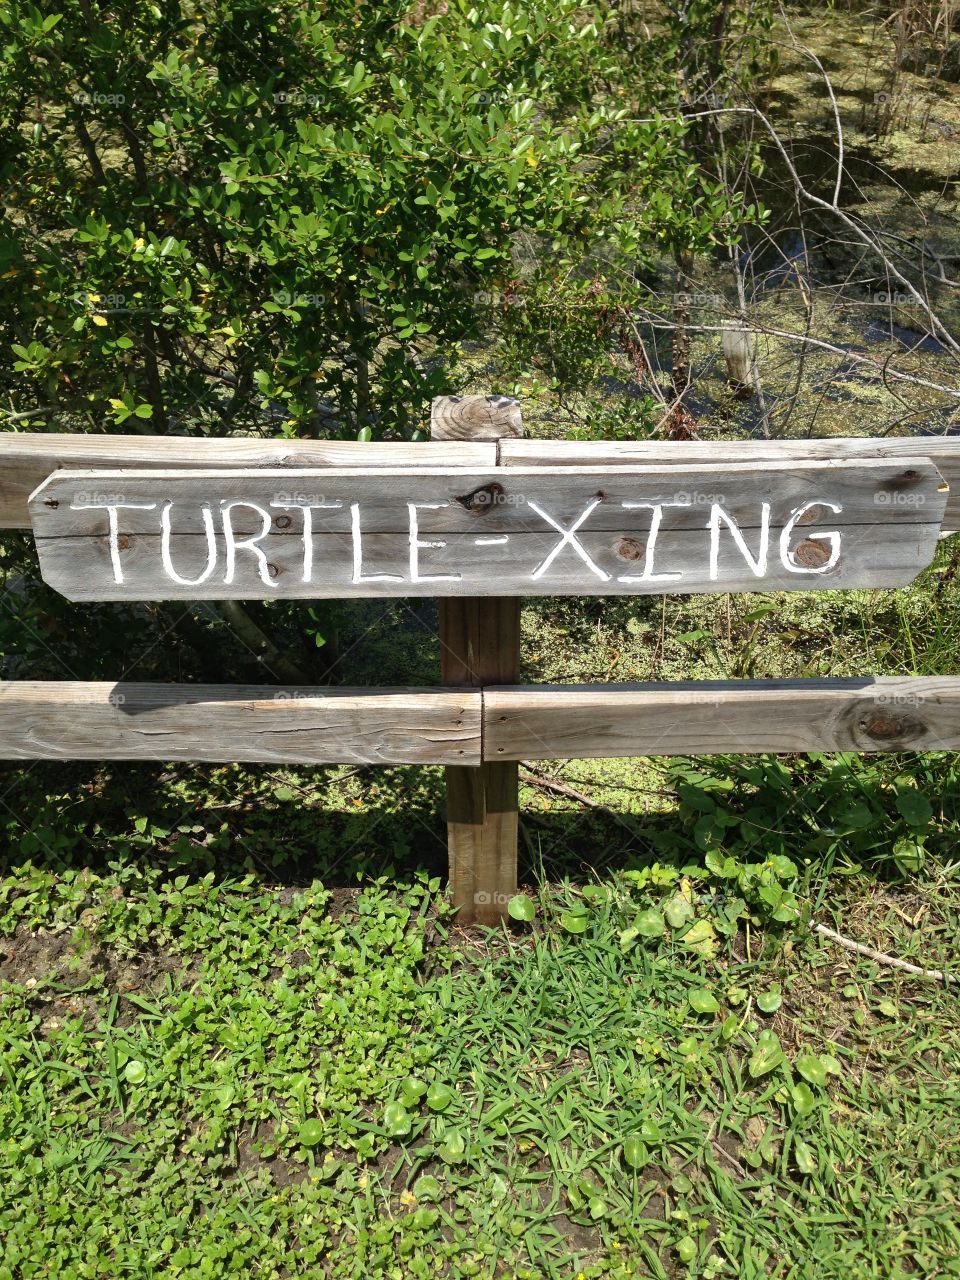 Wood fence with wood sign reading TURTLE-XING, turtle crossing sign, nature center